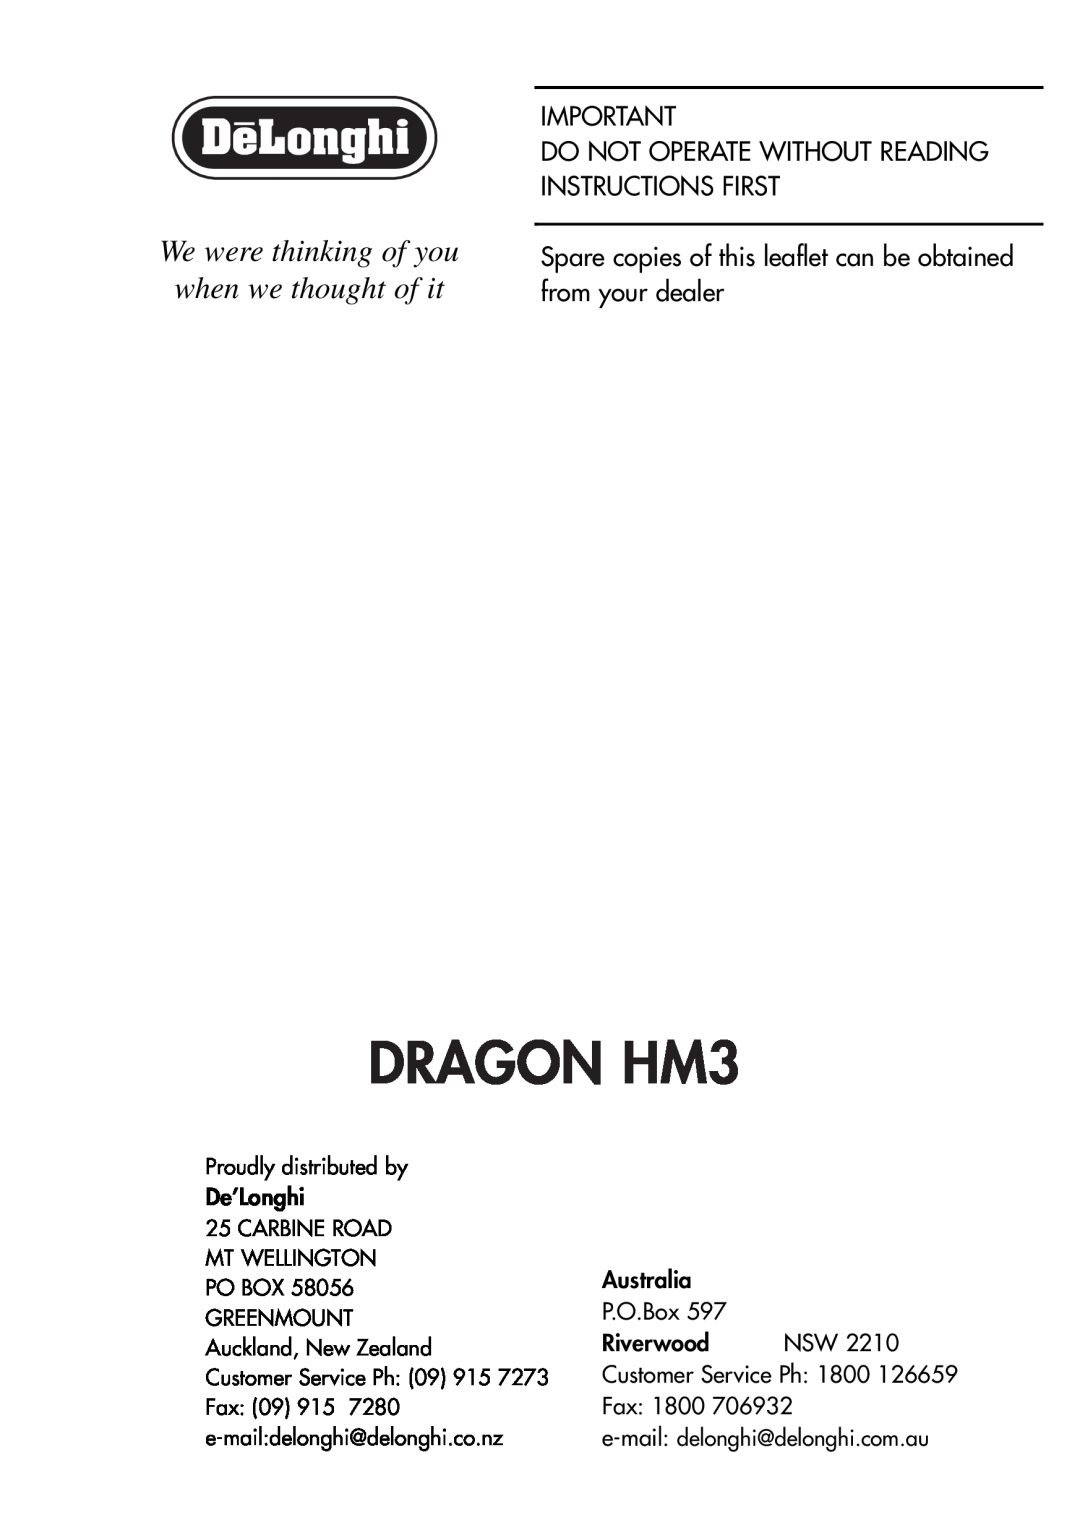 DeLonghi manual DRAGON HM3, We were thinking of you when we thought of it 